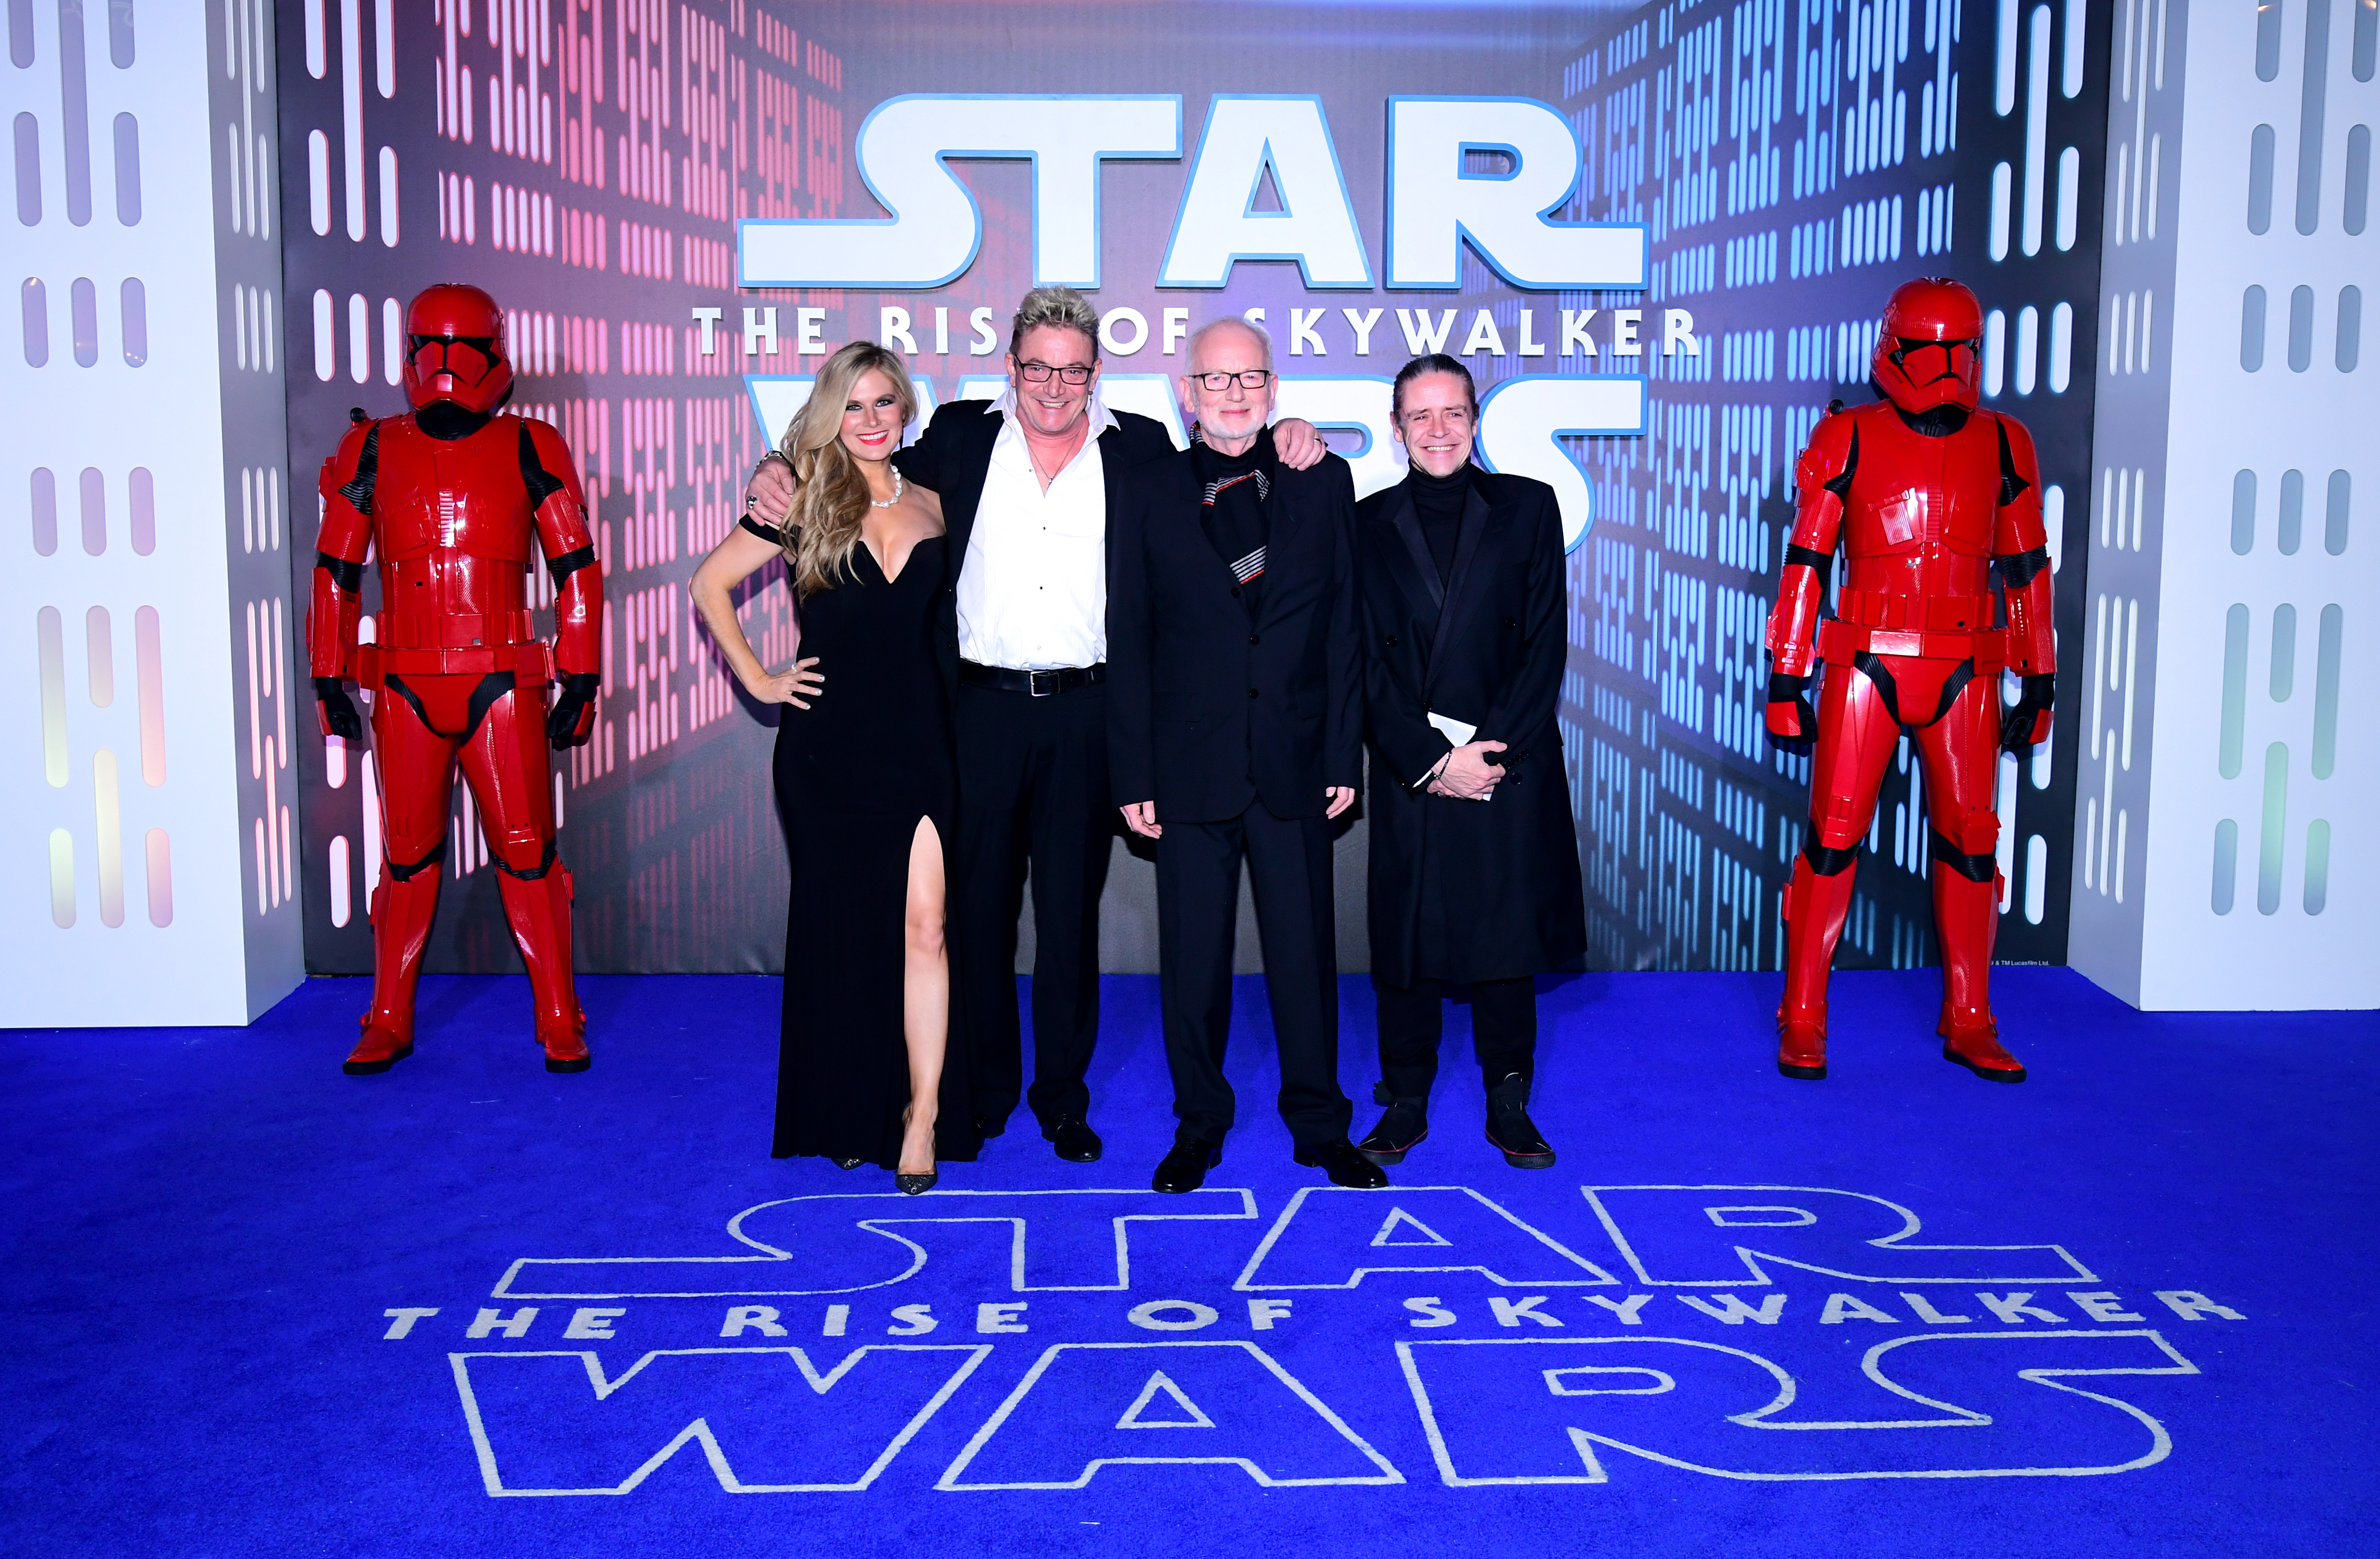 Ian McDiarmid and family attending the Star Wars: The Rise of Skywalker Premiere at Cineworld, Leicester Square, London.